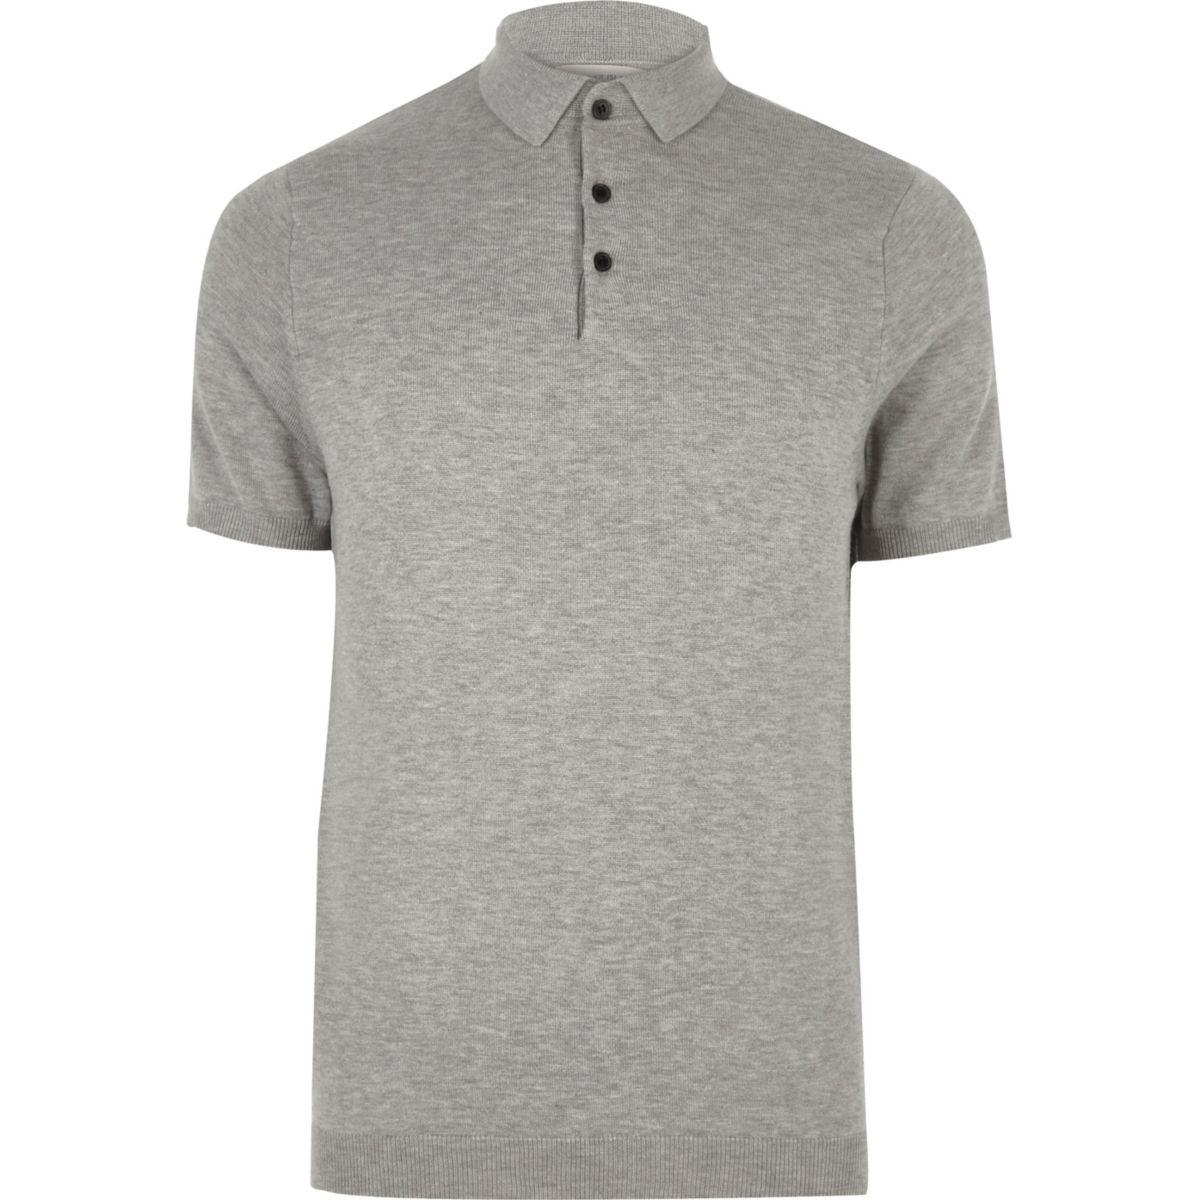 Lyst - River Island Grey Slim Fit Polo Shirt in Gray for Men